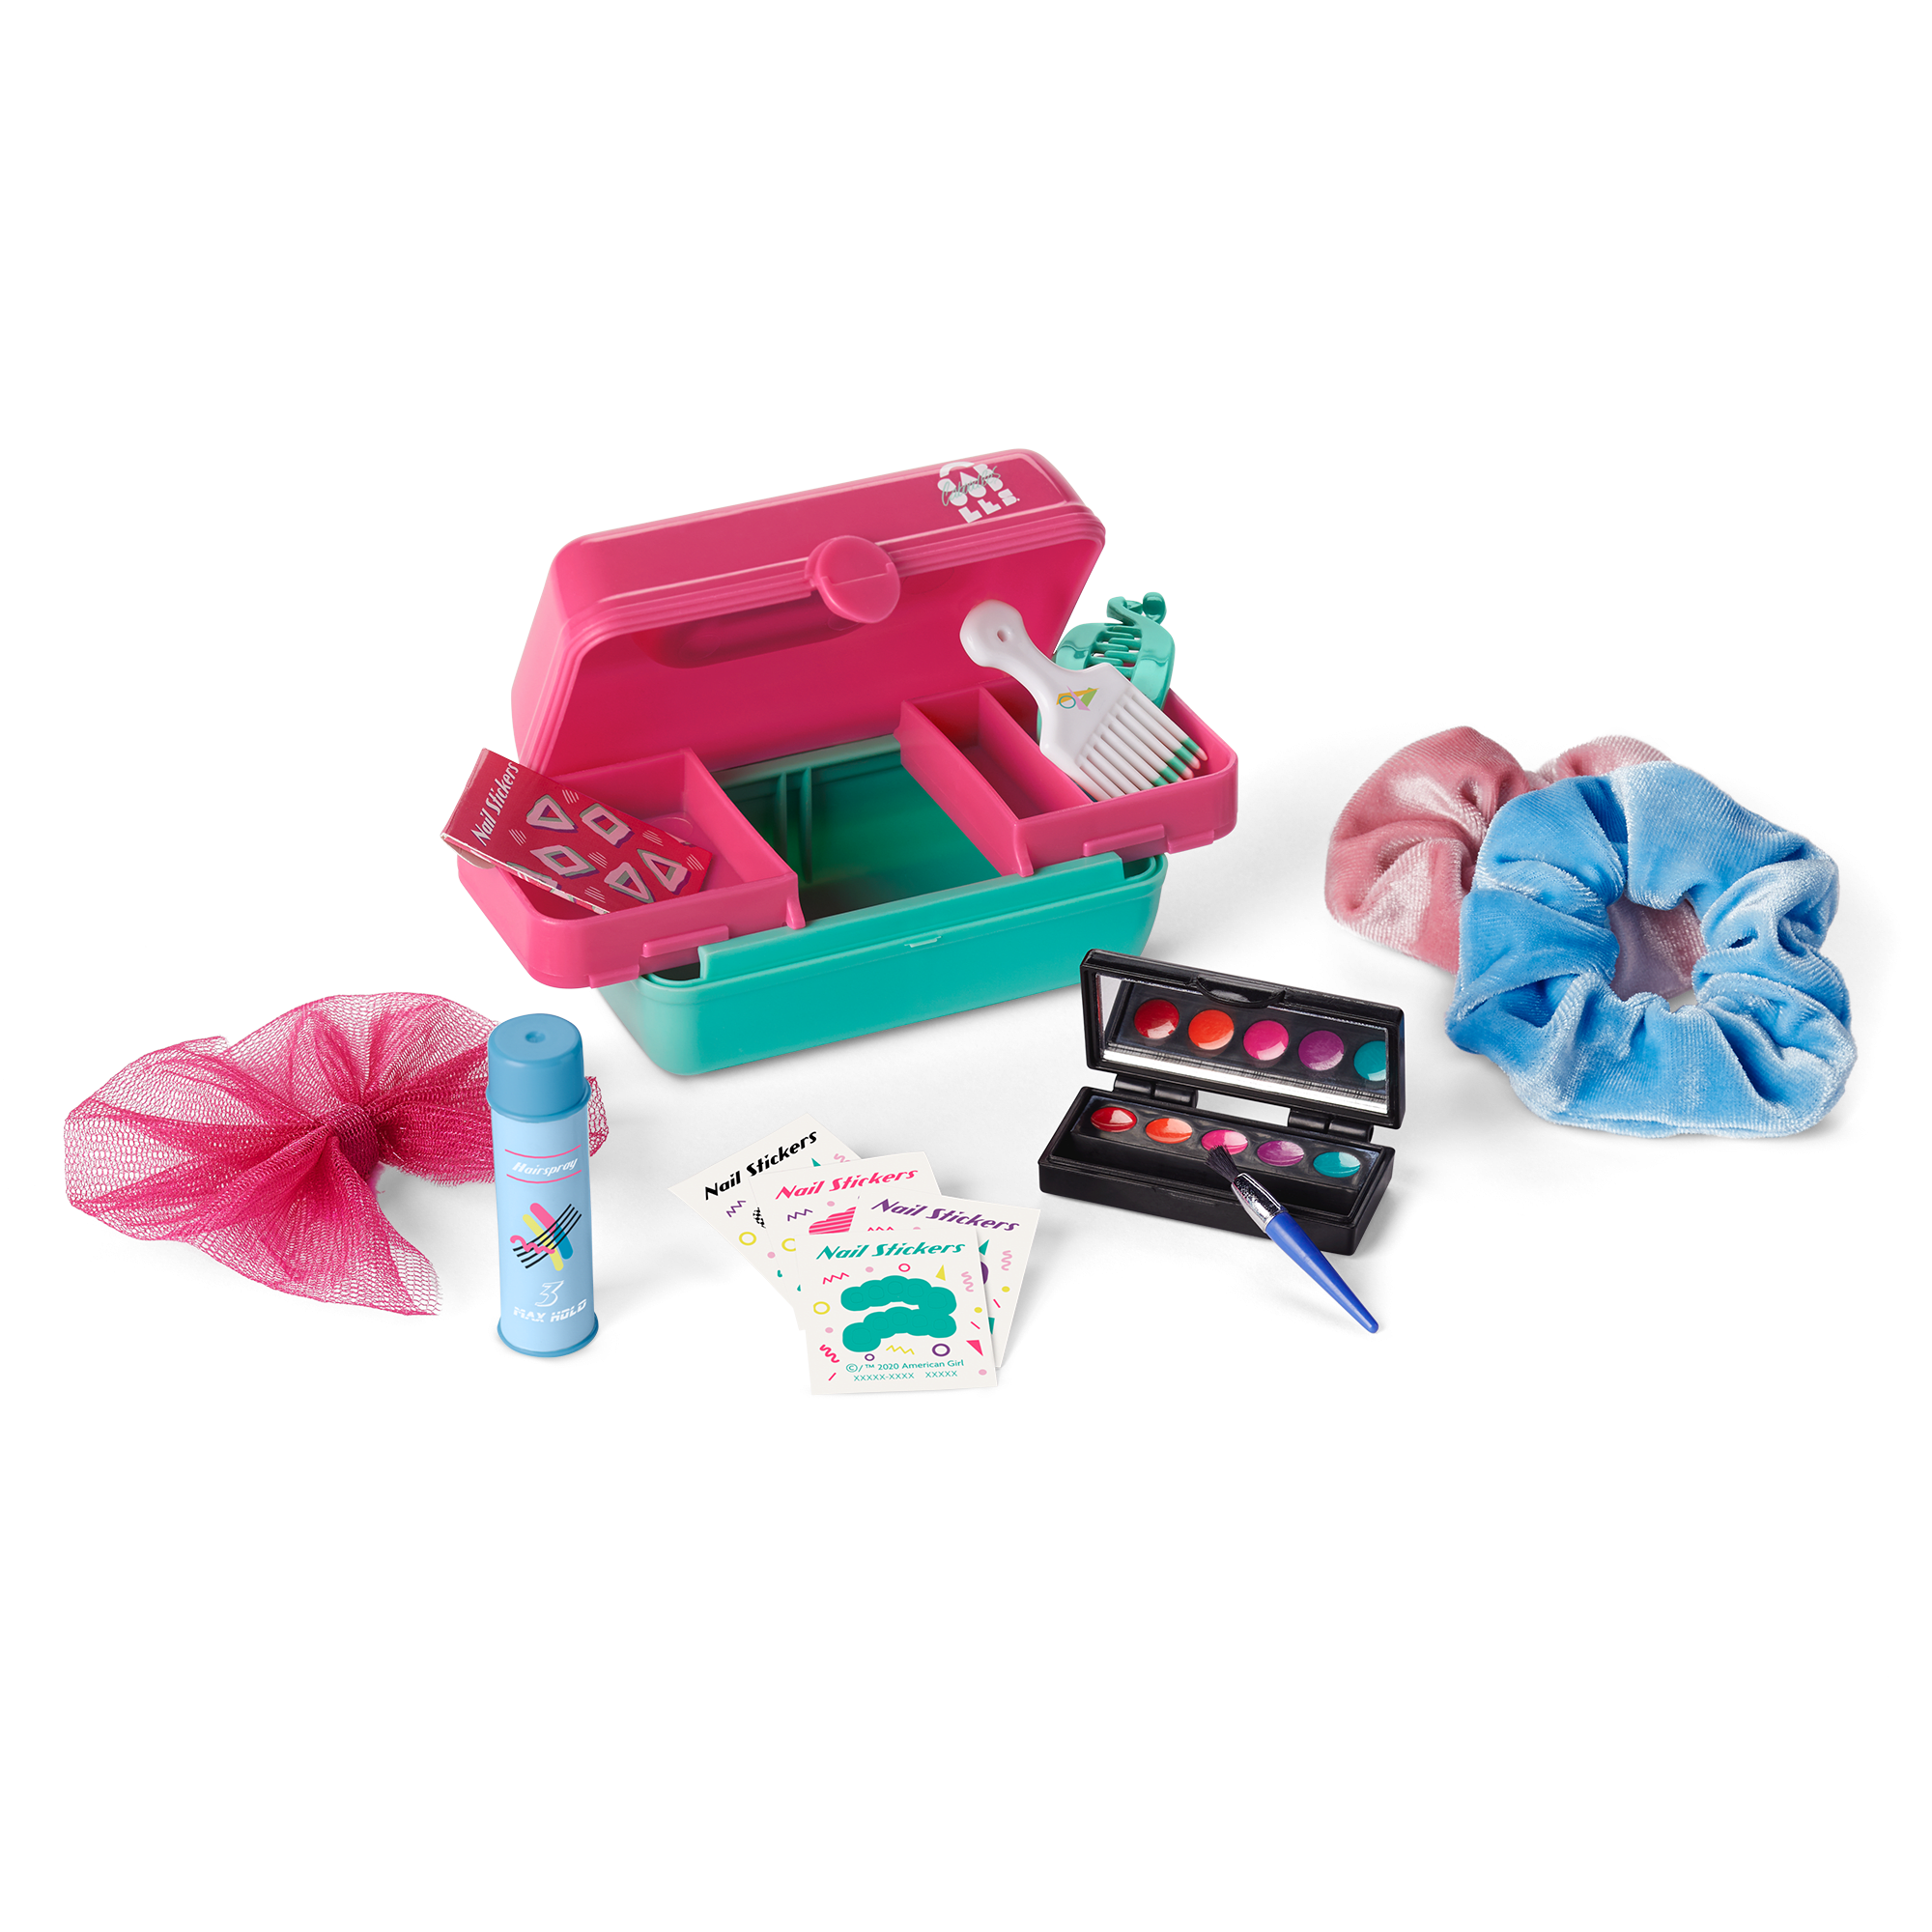 Courtney's Caboodles & Hair Accessories Kit